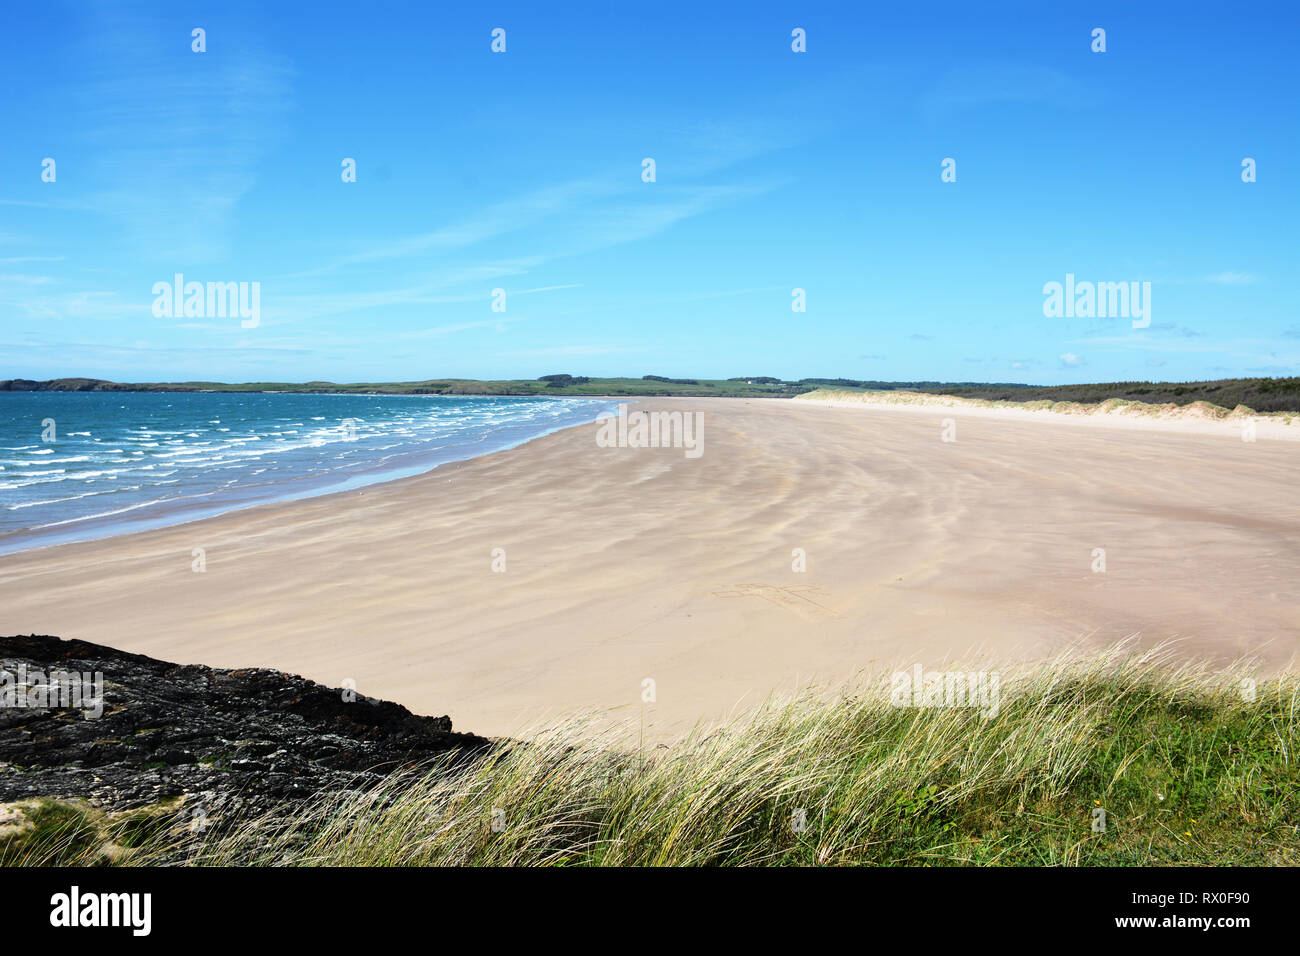 The beautiful and remote sandy beach on the northern side of Llanddwyn Island, which is set on the beautiful Isle of Anglesey in North Wales. Stock Photo